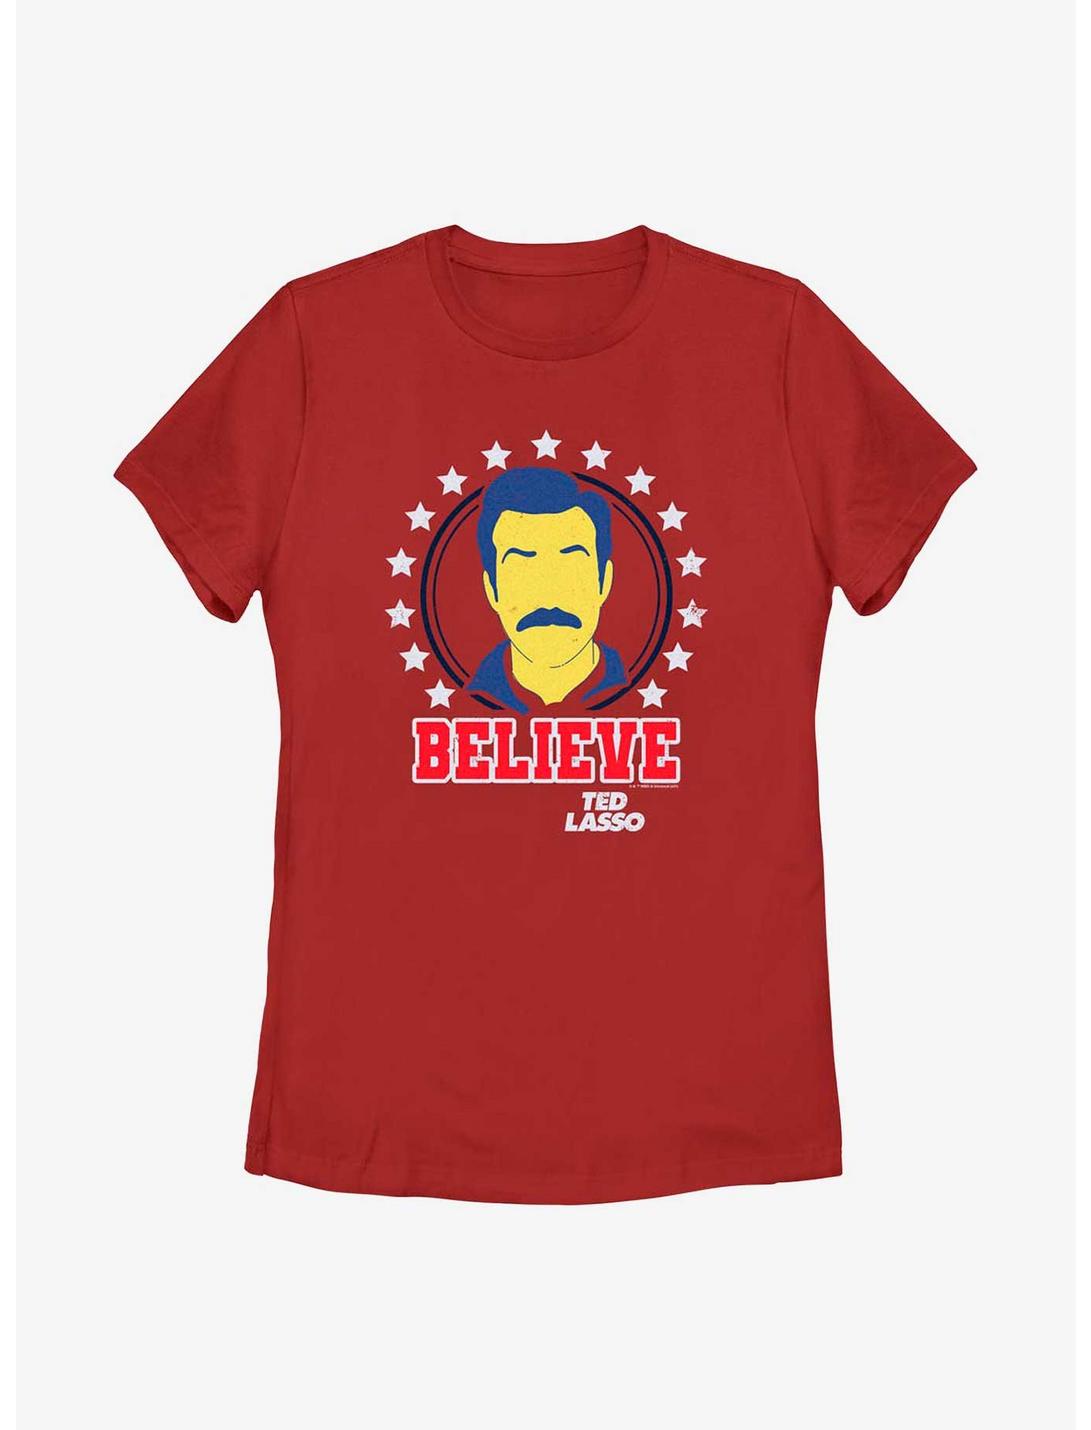 Ted Lasso Believe Stars Womens T-Shirt, RED, hi-res